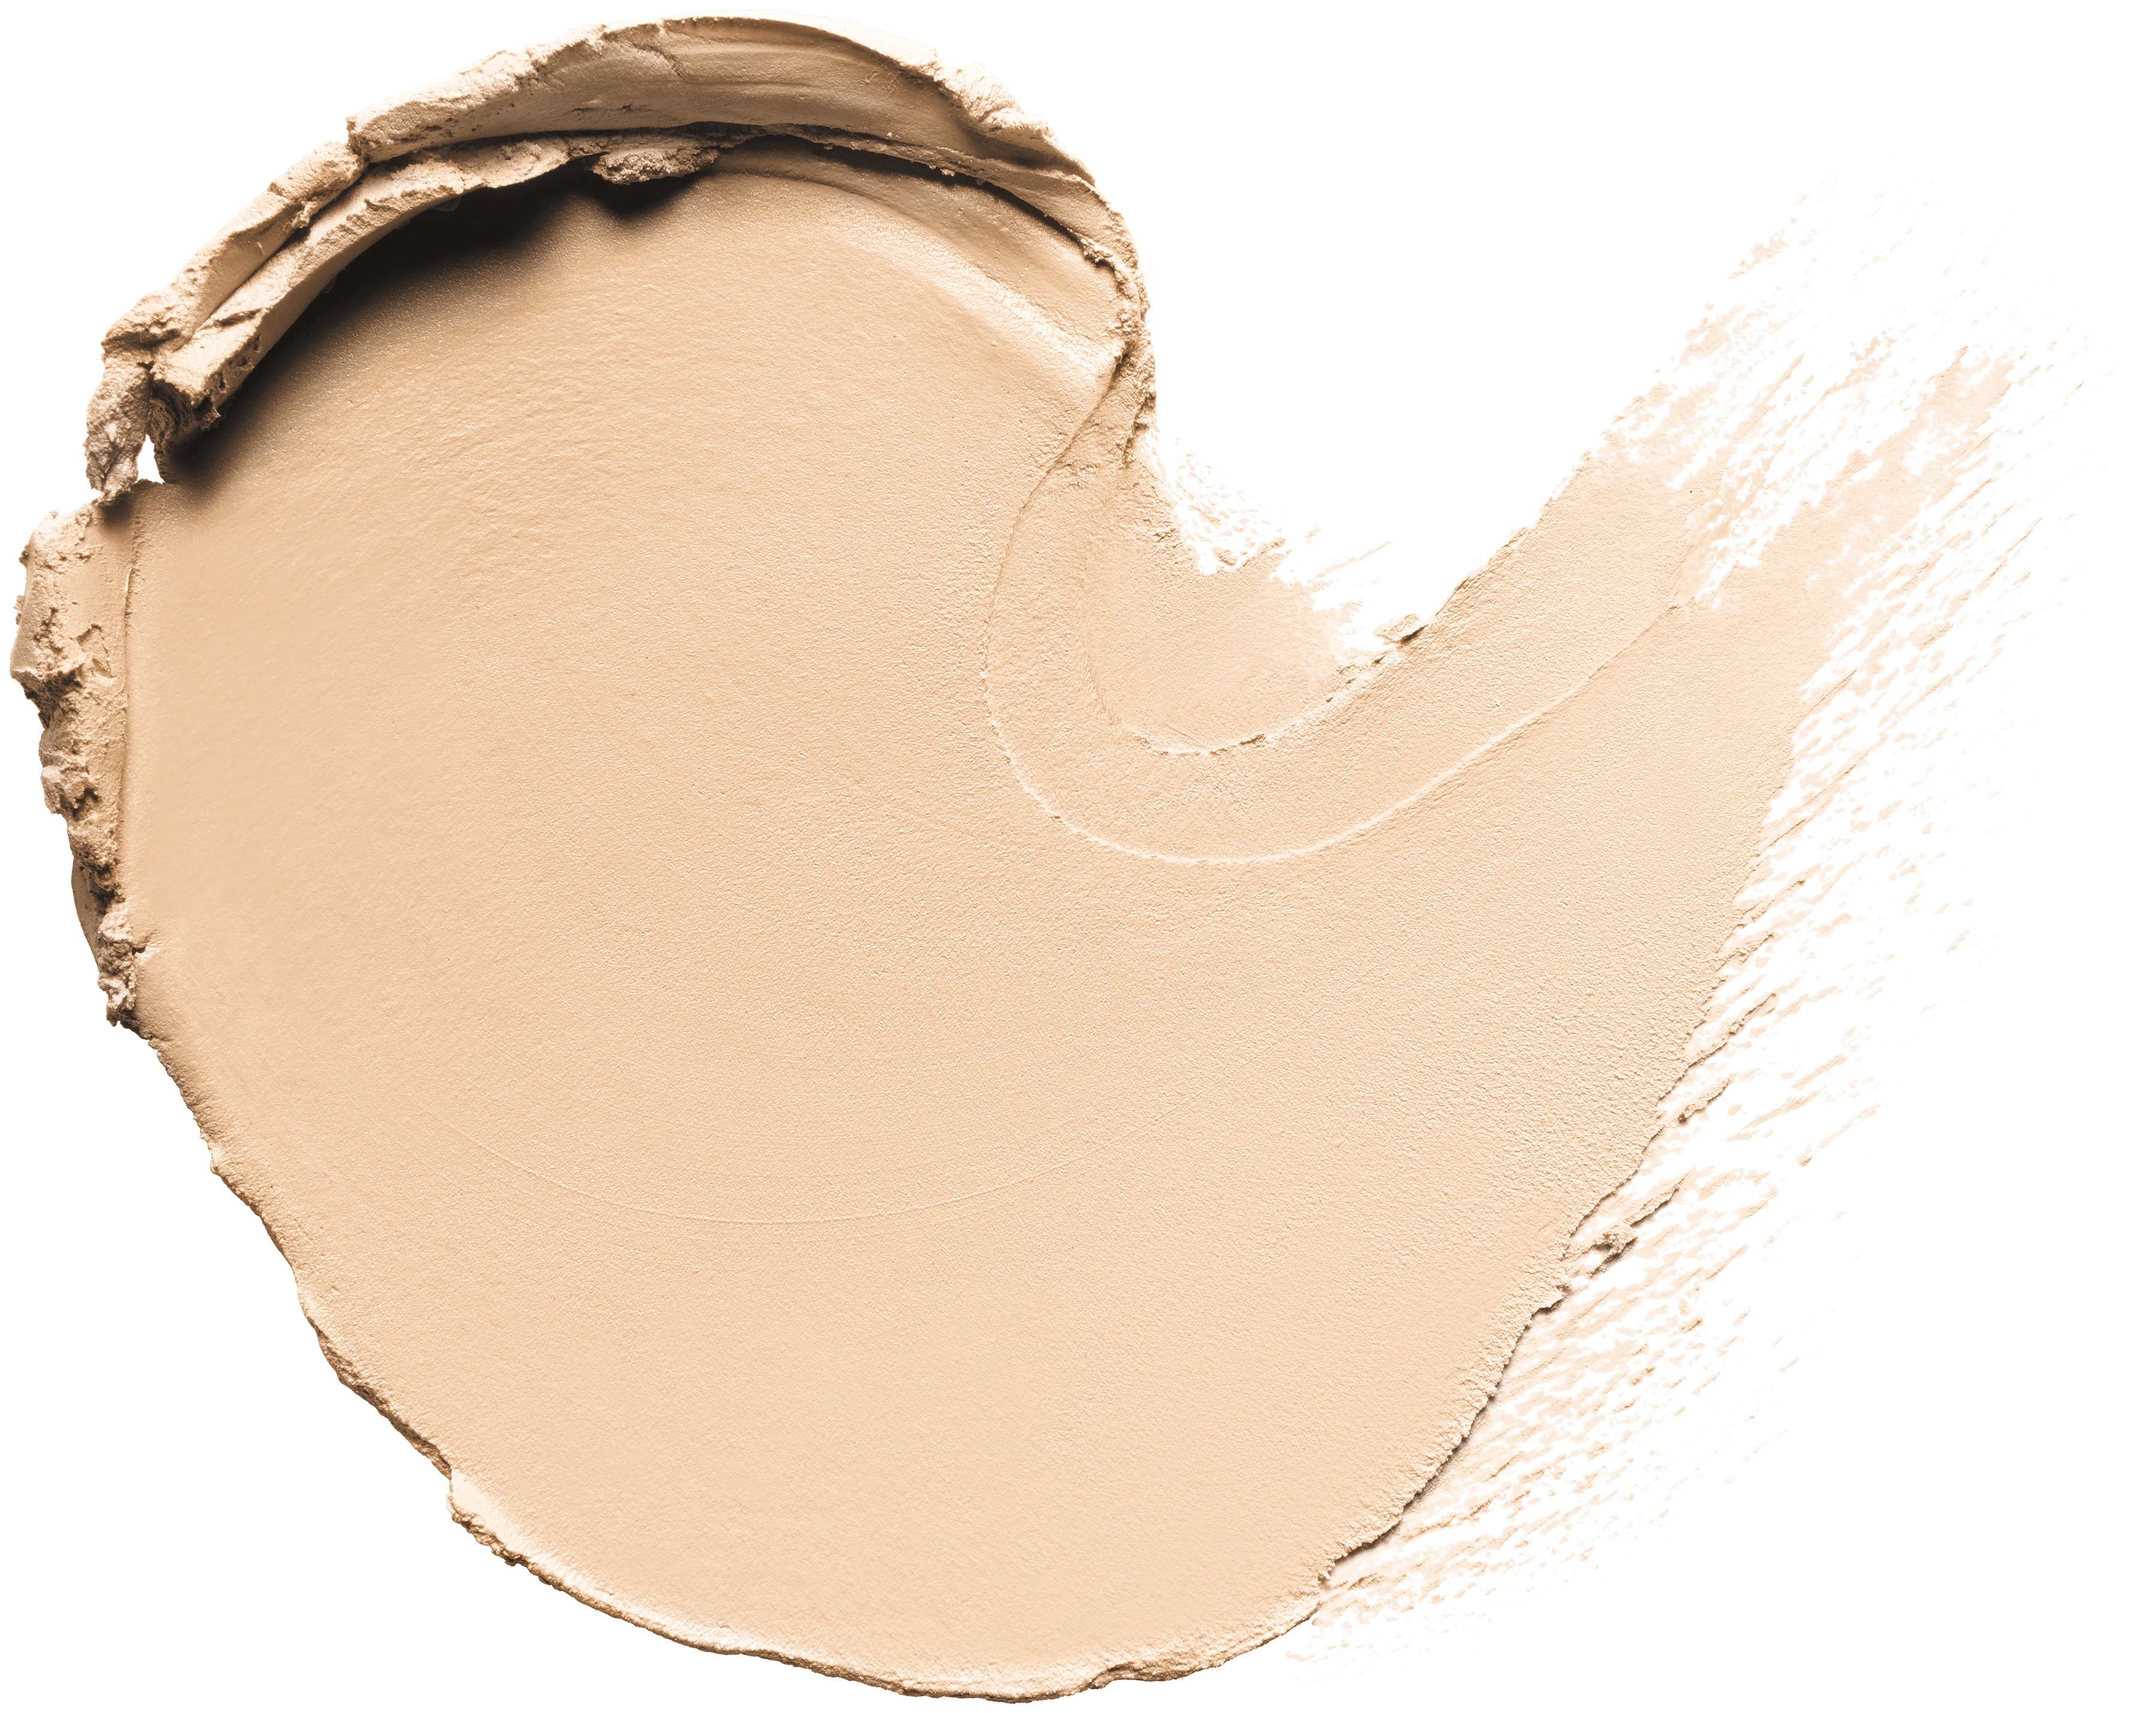 COVERGIRL Outlast All-Day Ultimate Finish 3-in-1 Foundation, 425 Buff Beige, 0.4 oz, Lightweight Foundation - image 3 of 16